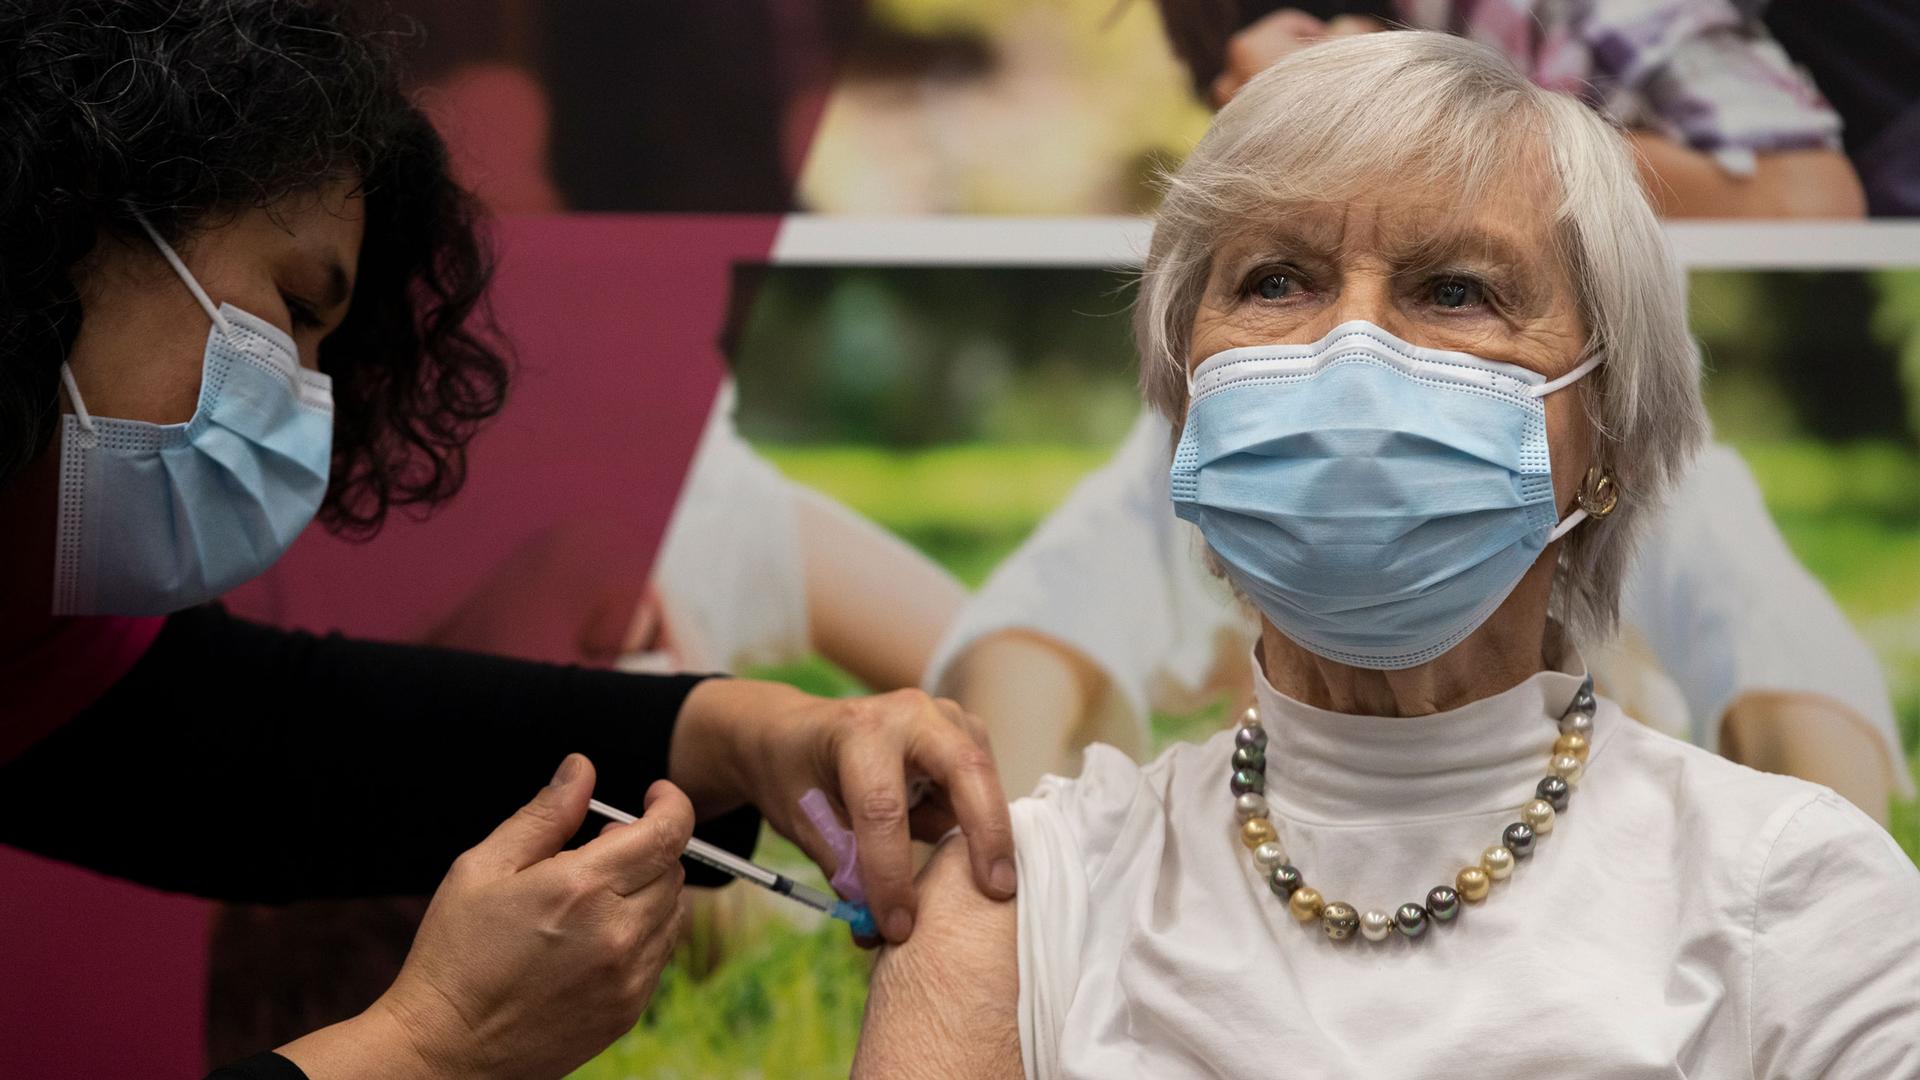 A woman is show wearing a white blouse with a pearl neclace and face mask while receiving a vaccine shot in her shoulder.